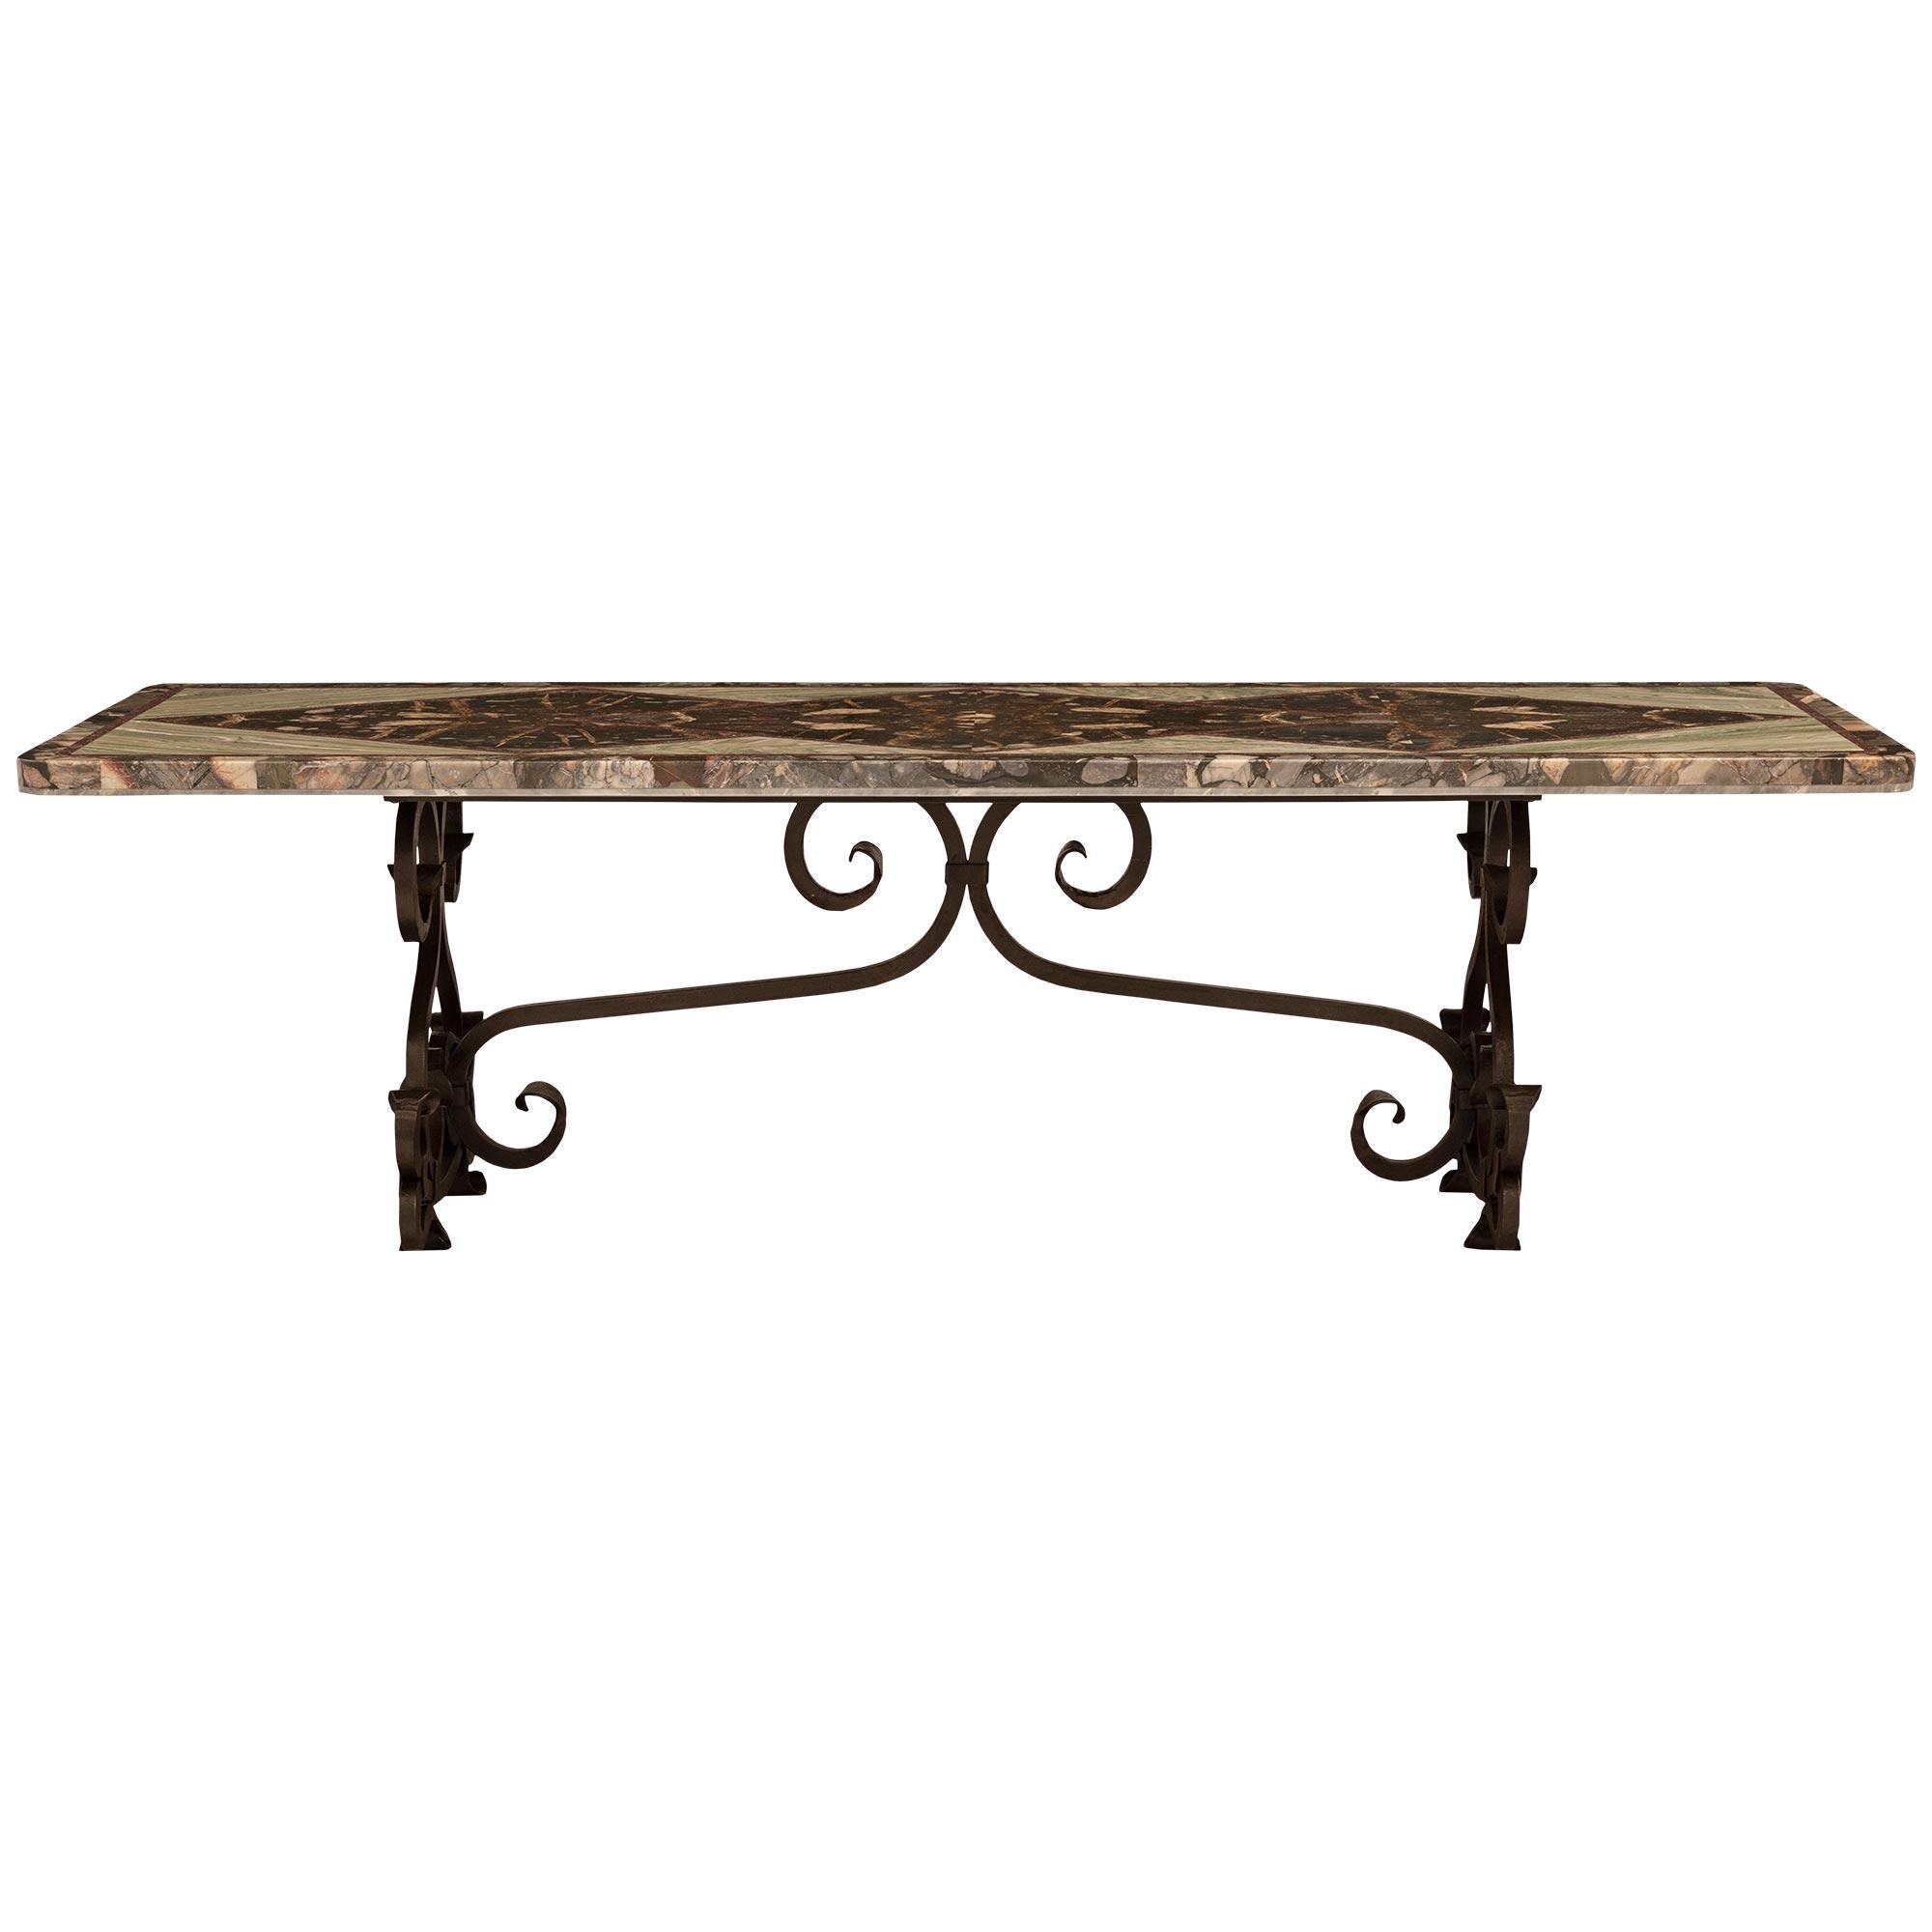 Italian 19th Century Wrought Iron And Marble Center/Dining Table For Sale